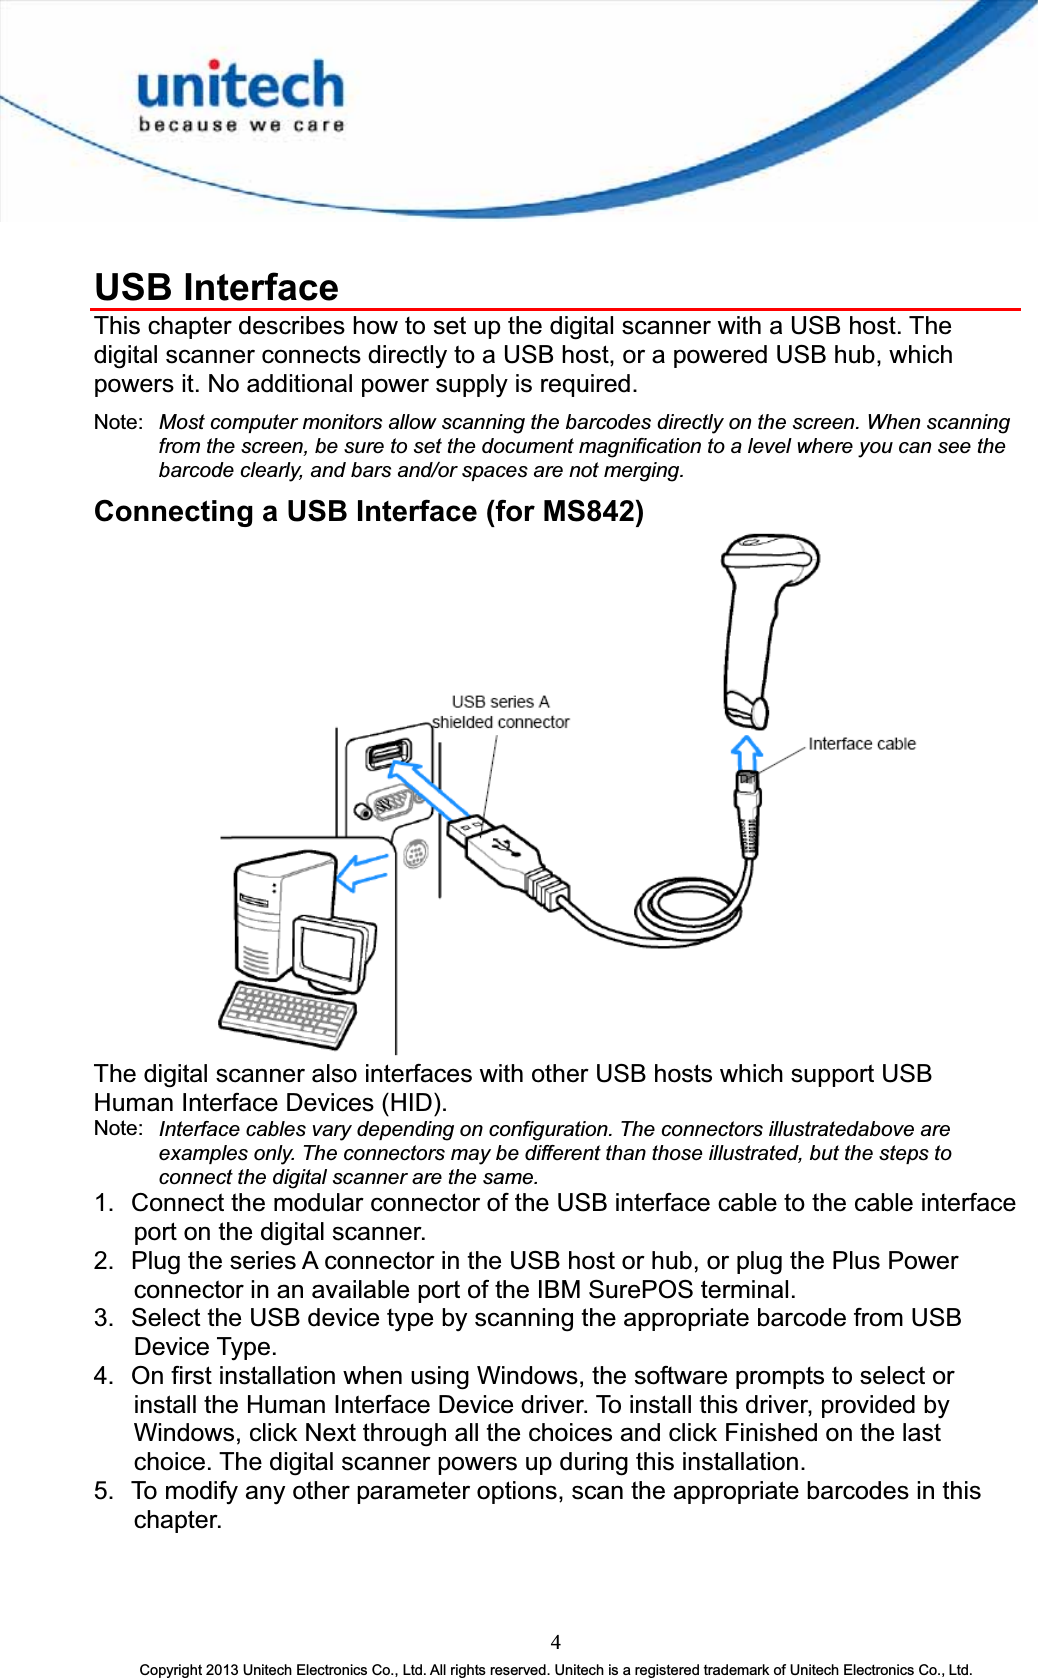 USB Interface This chapter describes how to set up the digital scanner with a USB host. The digital scanner connects directly to a USB host, or a powered USB hub, which powers it. No additional power supply is required. Note: Most computer monitors allow scanning the barcodes directly on the screen. When scanning from the screen, be sure to set the document magnification to a level where you can see the barcode clearly, and bars and/or spaces are not merging. Connecting a USB Interface (for MS842) The digital scanner also interfaces with other USB hosts which support USB Human Interface Devices (HID). Note: Interface cables vary depending on configuration. The connectors illustratedabove are examples only. The connectors may be different than those illustrated, but the steps to connect the digital scanner are the same. 1.  Connect the modular connector of the USB interface cable to the cable interface port on the digital scanner. 2.  Plug the series A connector in the USB host or hub, or plug the Plus Power connector in an available port of the IBM SurePOS terminal. 3.  Select the USB device type by scanning the appropriate barcode from USB Device Type. 4.  On first installation when using Windows, the software prompts to select or install the Human Interface Device driver. To install this driver, provided by Windows, click Next through all the choices and click Finished on the last choice. The digital scanner powers up during this installation. 5.  To modify any other parameter options, scan the appropriate barcodes in this chapter. 4Copyright 2013 Unitech Electronics Co., Ltd. All rights reserved. Unitech is a registered trademark of Unitech Electronics Co., Ltd. 